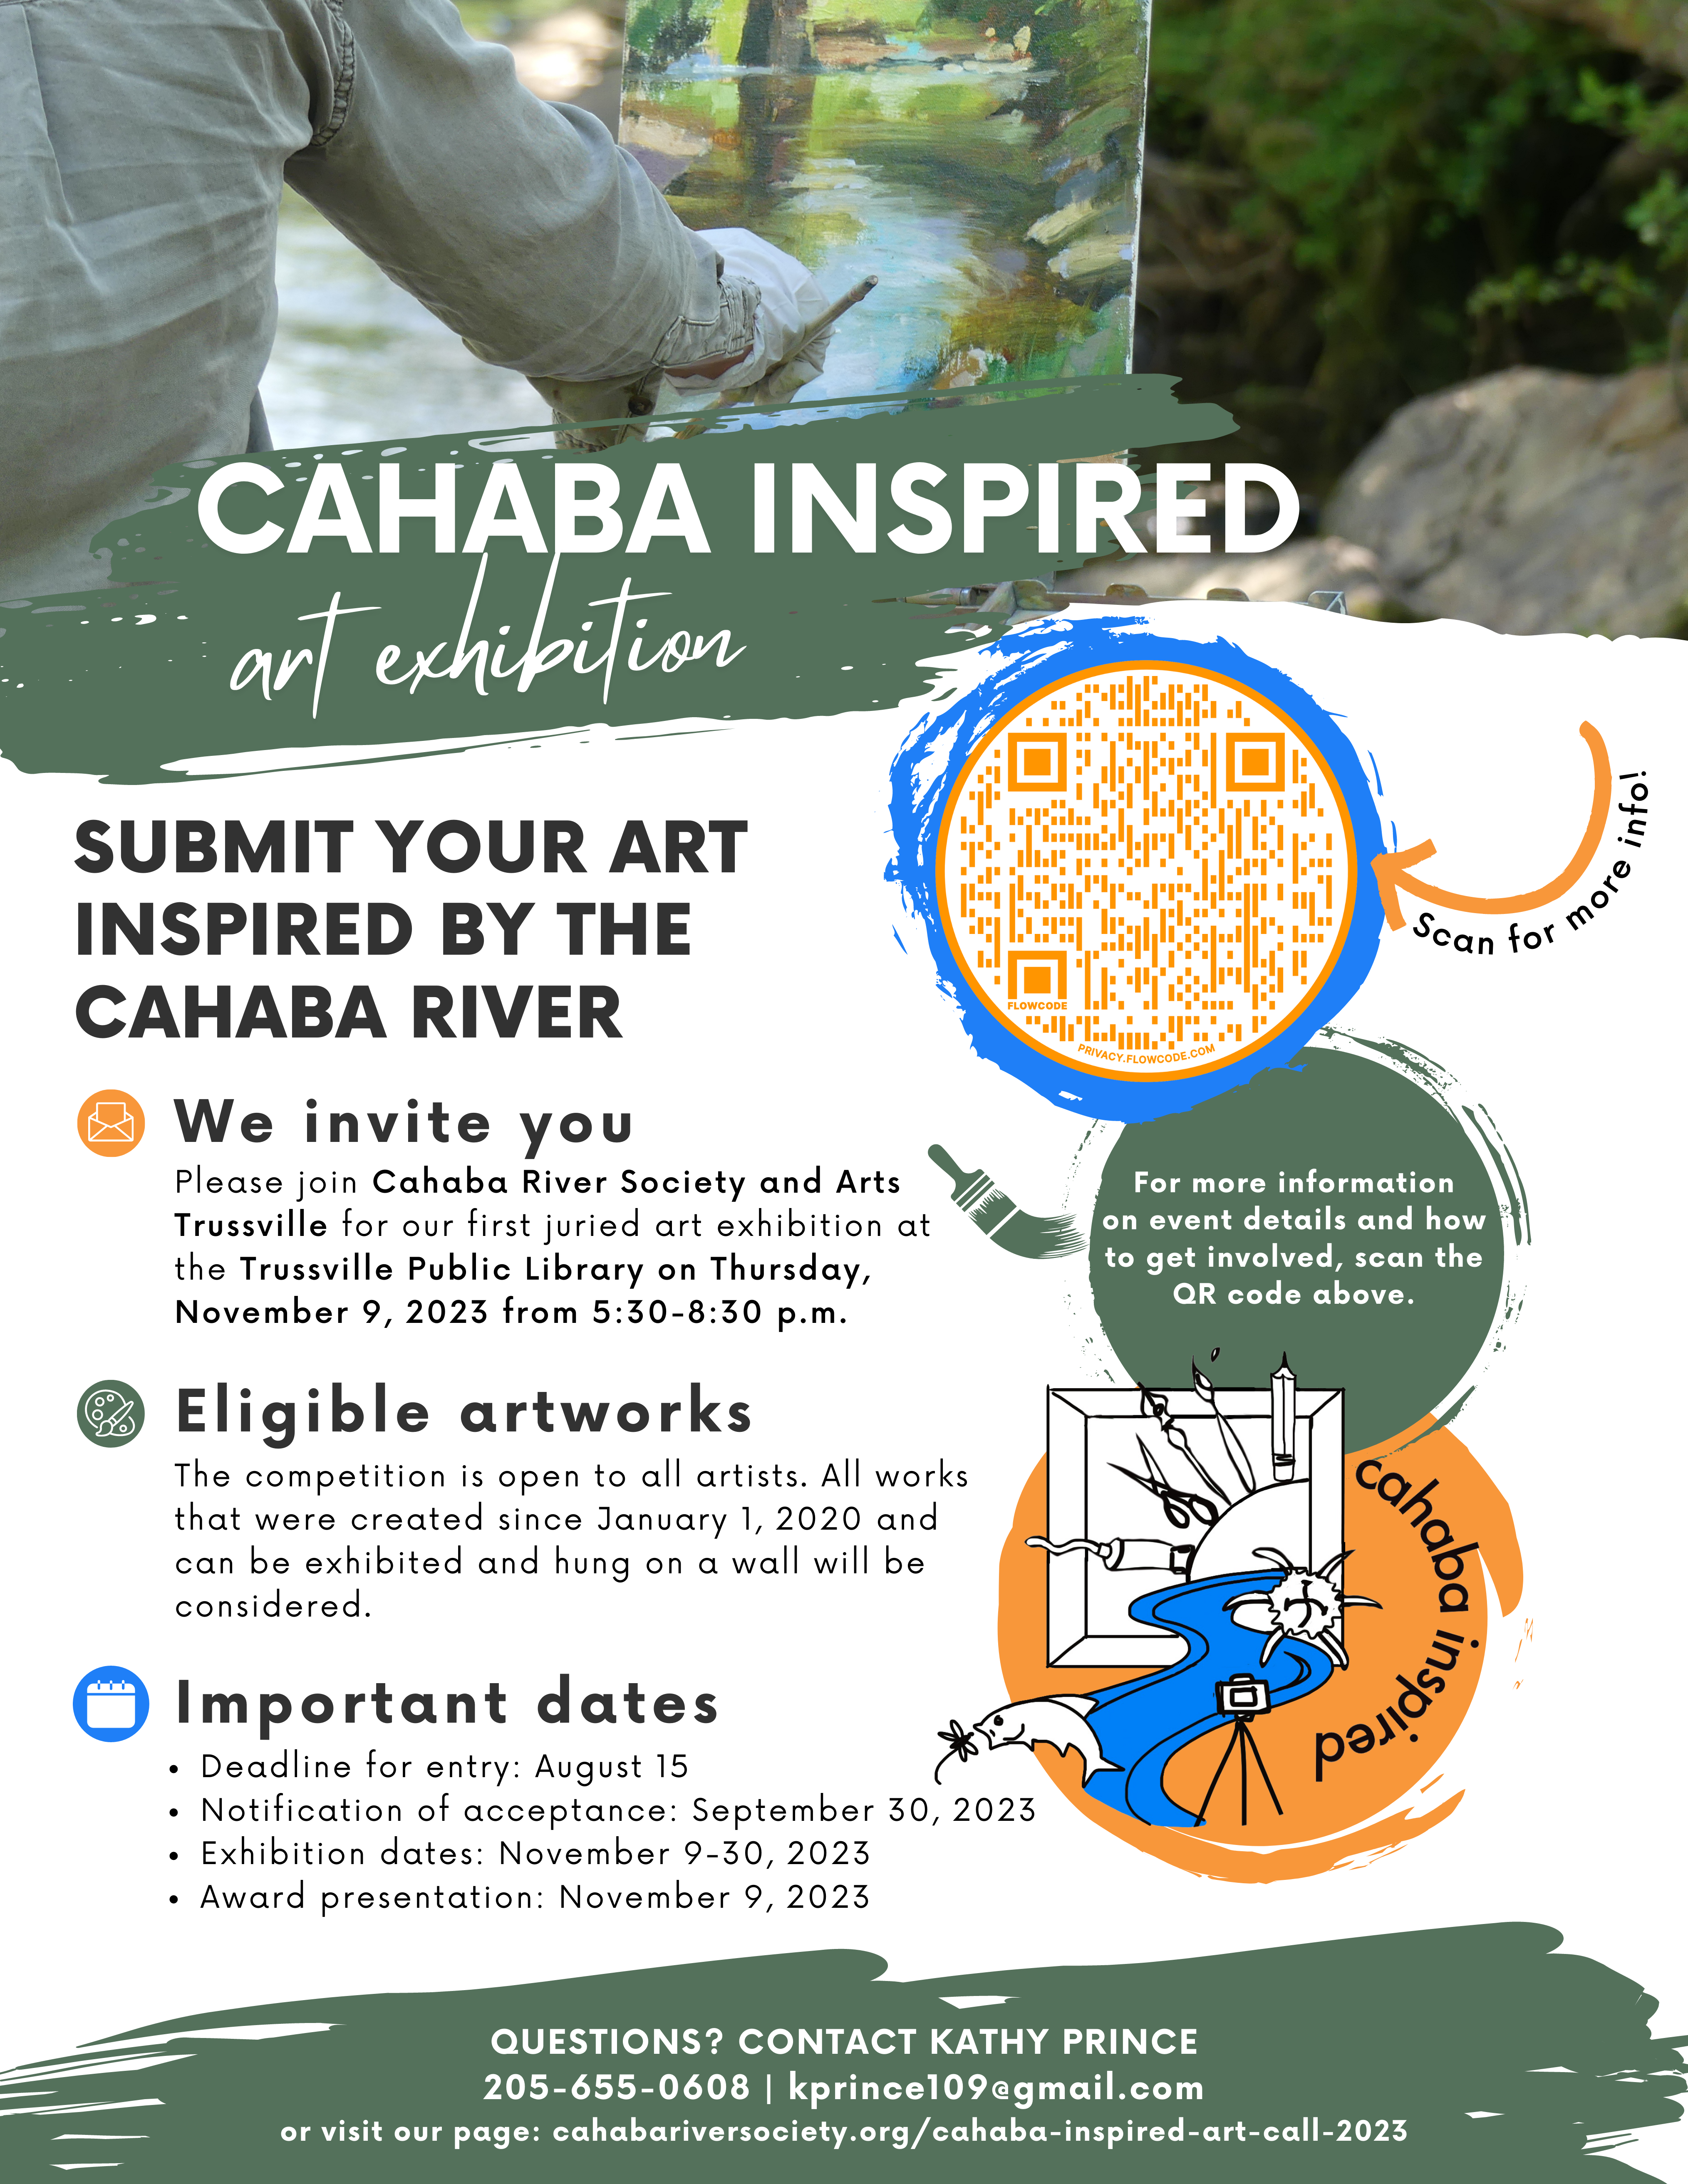 Invitation to Artists: Cahaba-inspired art sought for juried art show in November 2023